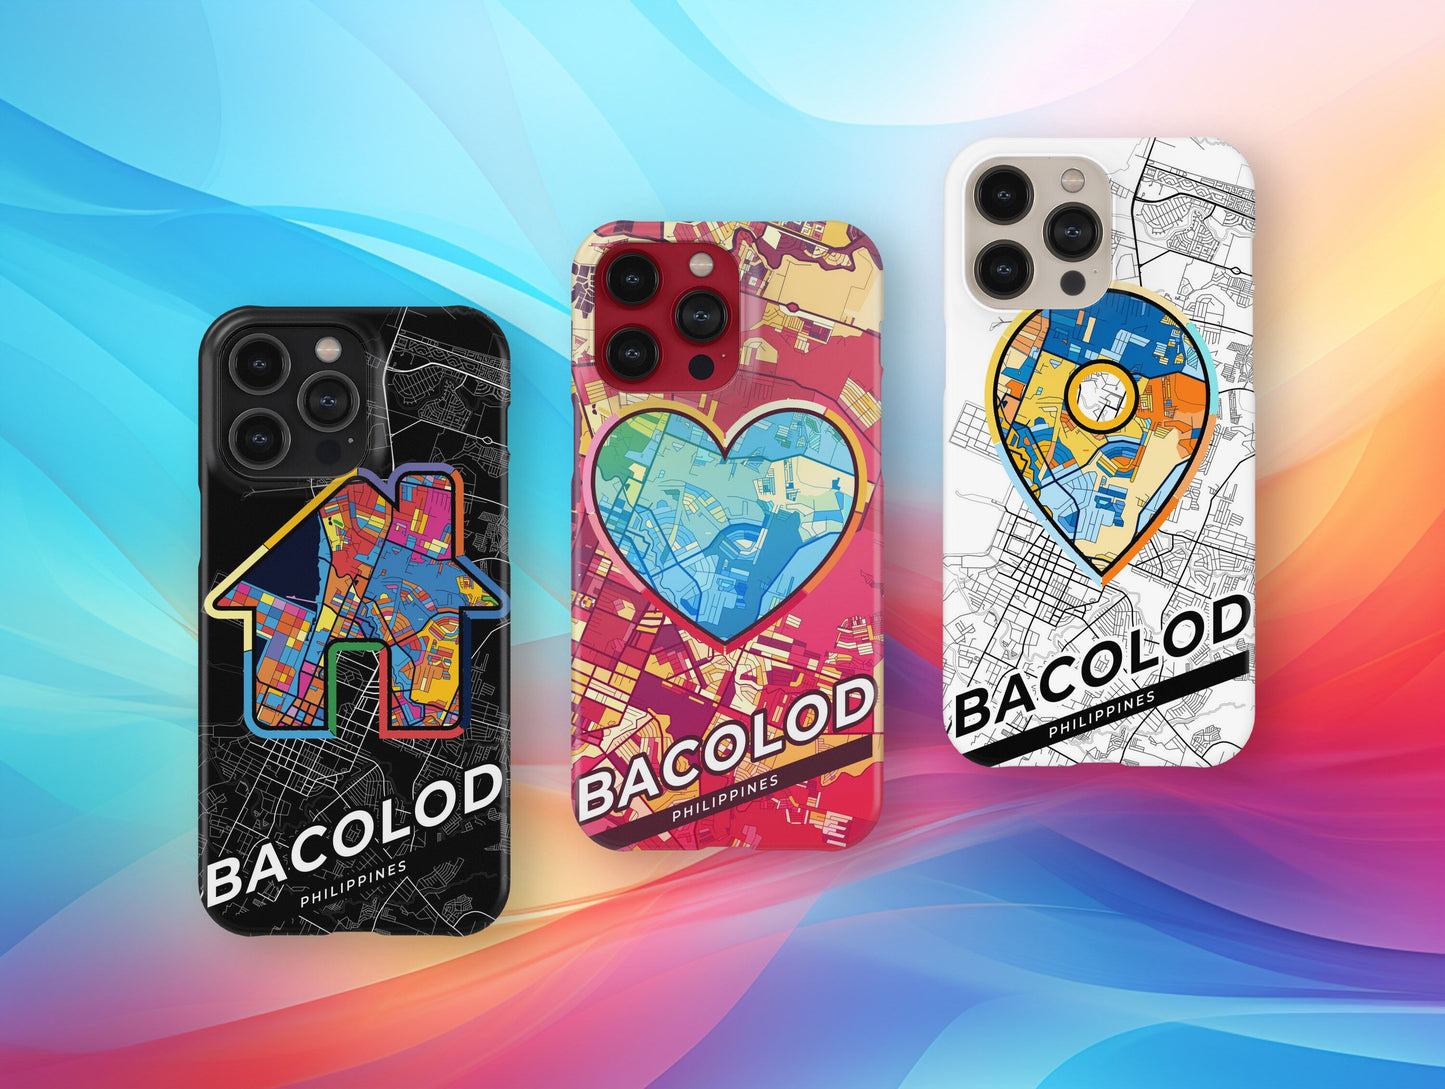 Bacolod Philippines slim phone case with colorful icon. Birthday, wedding or housewarming gift. Couple match cases.